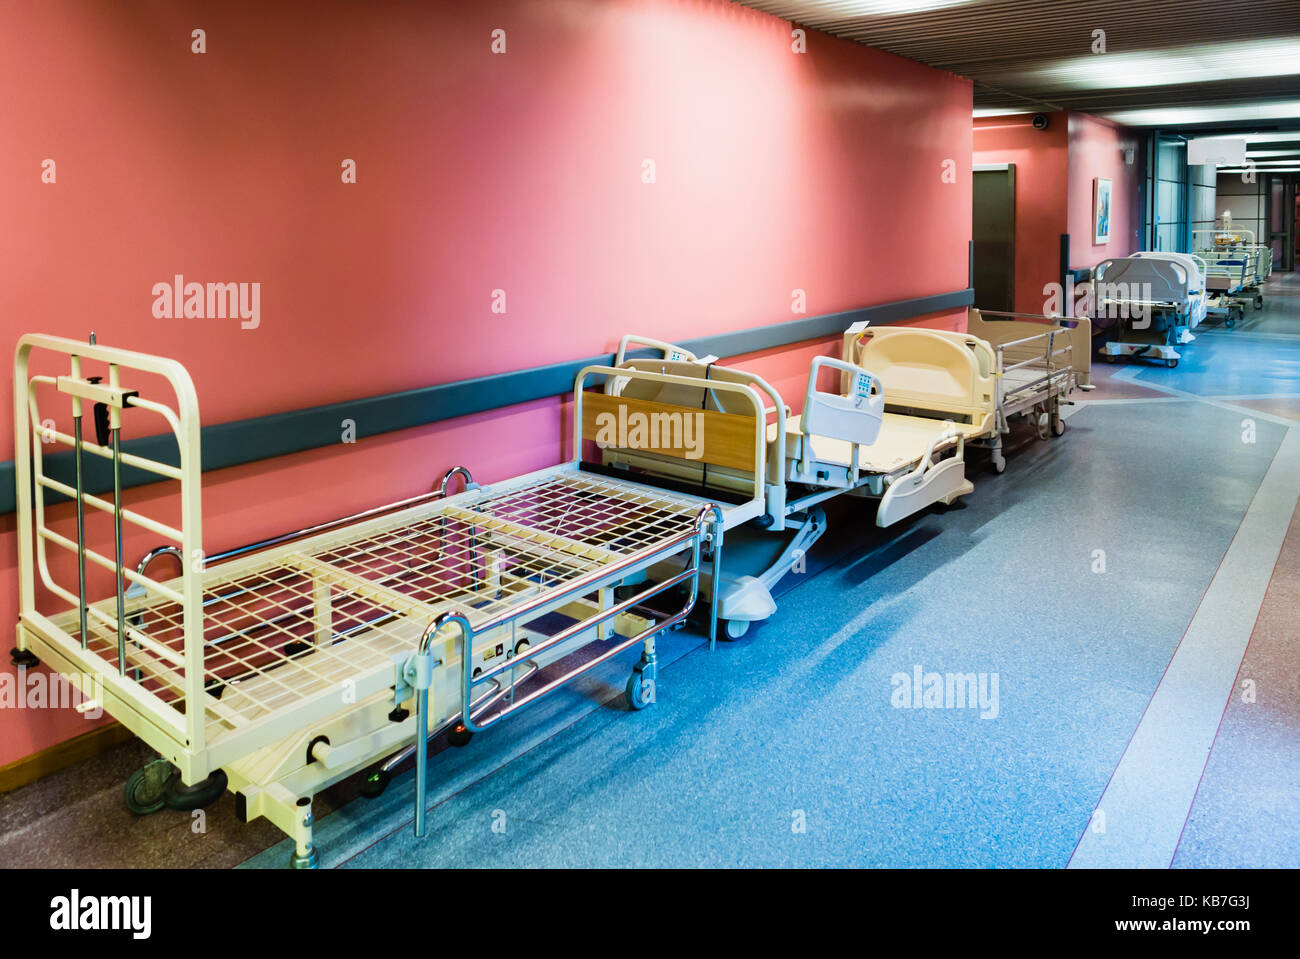 Patient beds being stored in the corridor of a hospital. Stock Photo